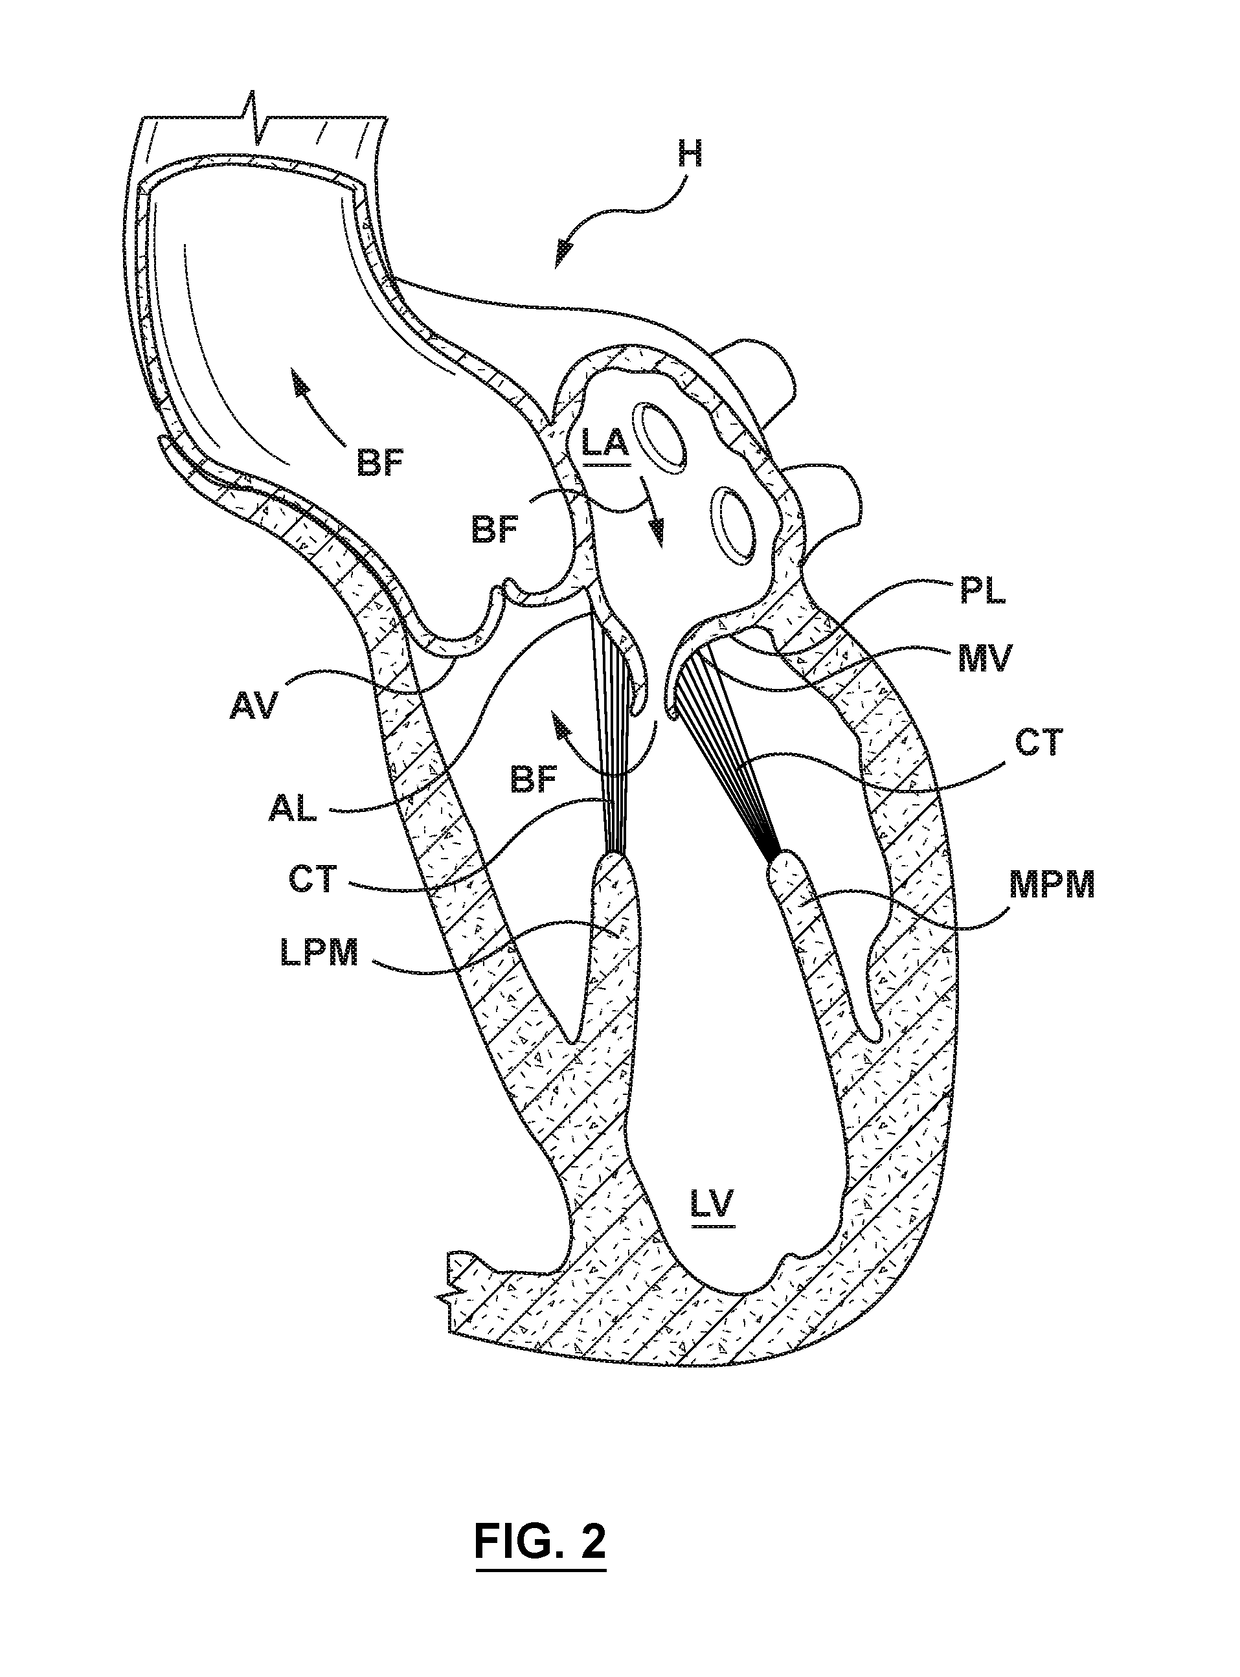 Chordae tendineae management devices for use with a valve prosthesis delivery system and methods of use thereof